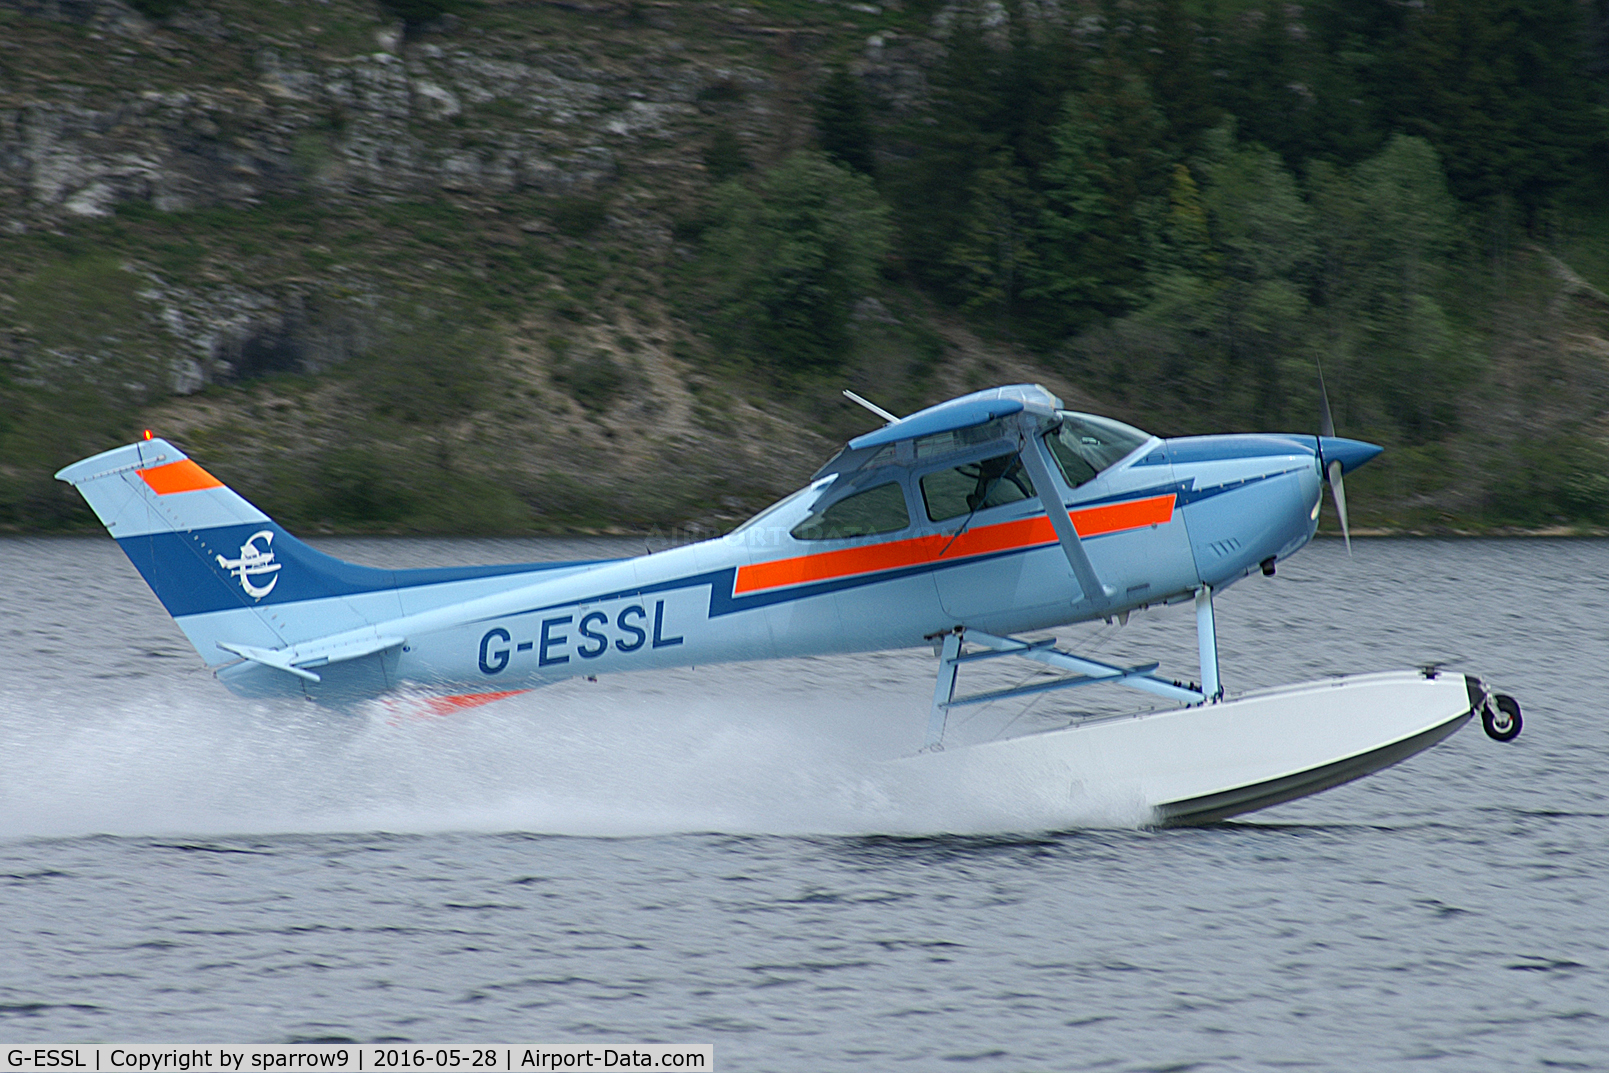 G-ESSL, 1981 Cessna 182R Skylane C/N 182-67947, Just landed on the Lac de Joux(3294 ft amsl) near L'Abbaye in the Swiss Jura-mountains. New color was added to make more conspicuous?